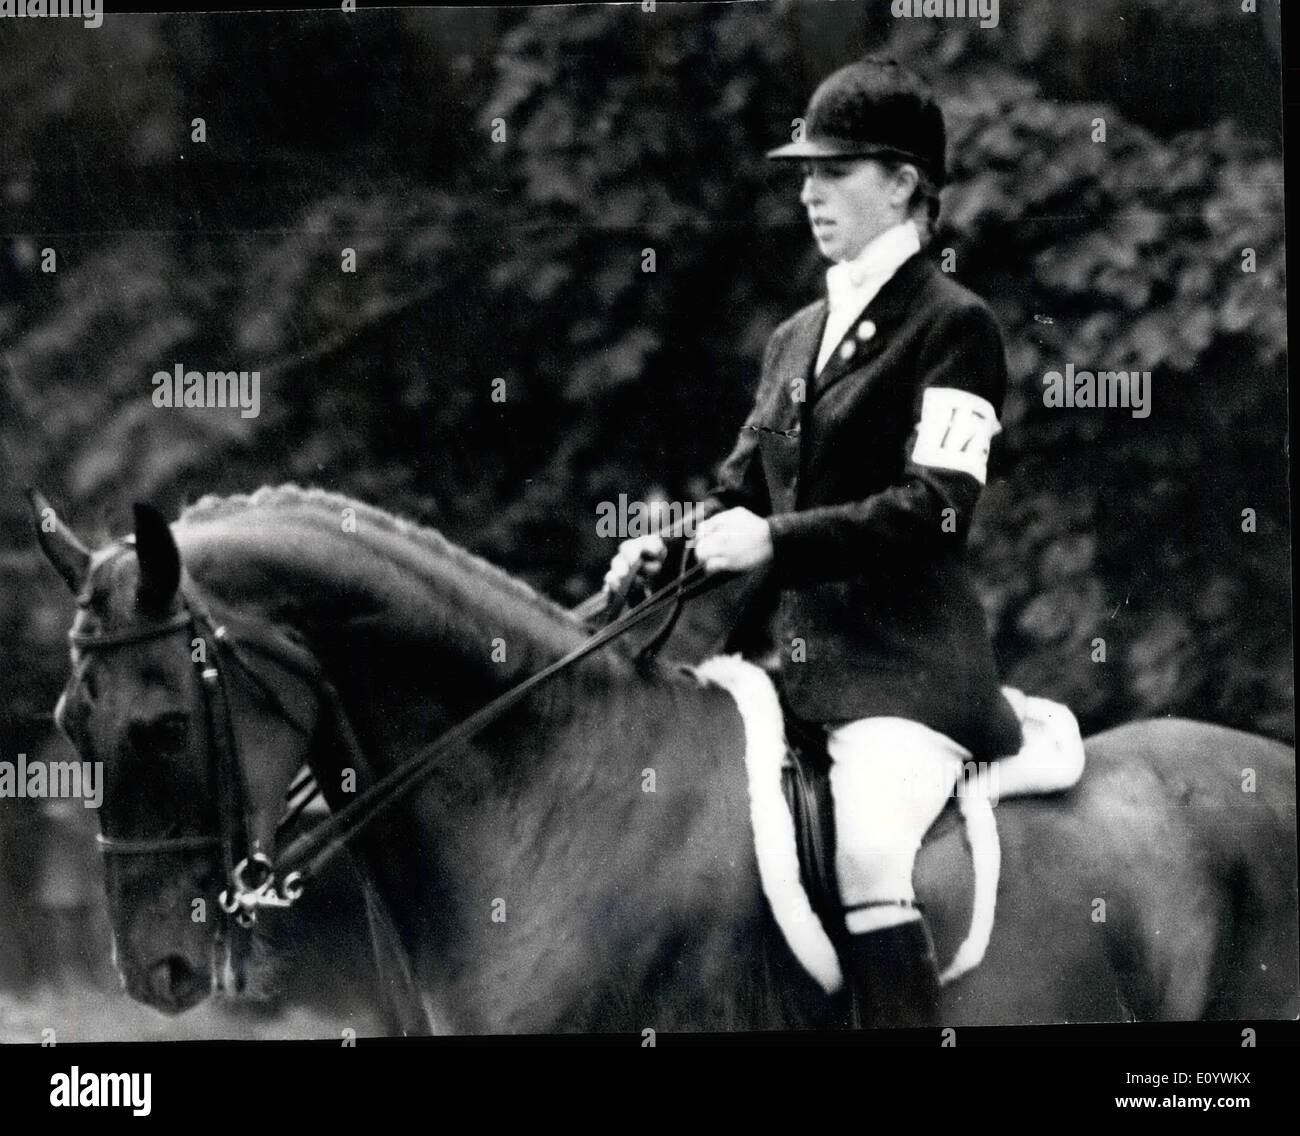 Aug. 08, 1971 - Princess Anne in Eridge Horse trials. Photo shows Princess Anne seen competing in the Class III-Advanced Dressage event, at the two-day Eridge Horse Trials, which began today. The Princess was riding her horse 'Doublet' Stock Photo